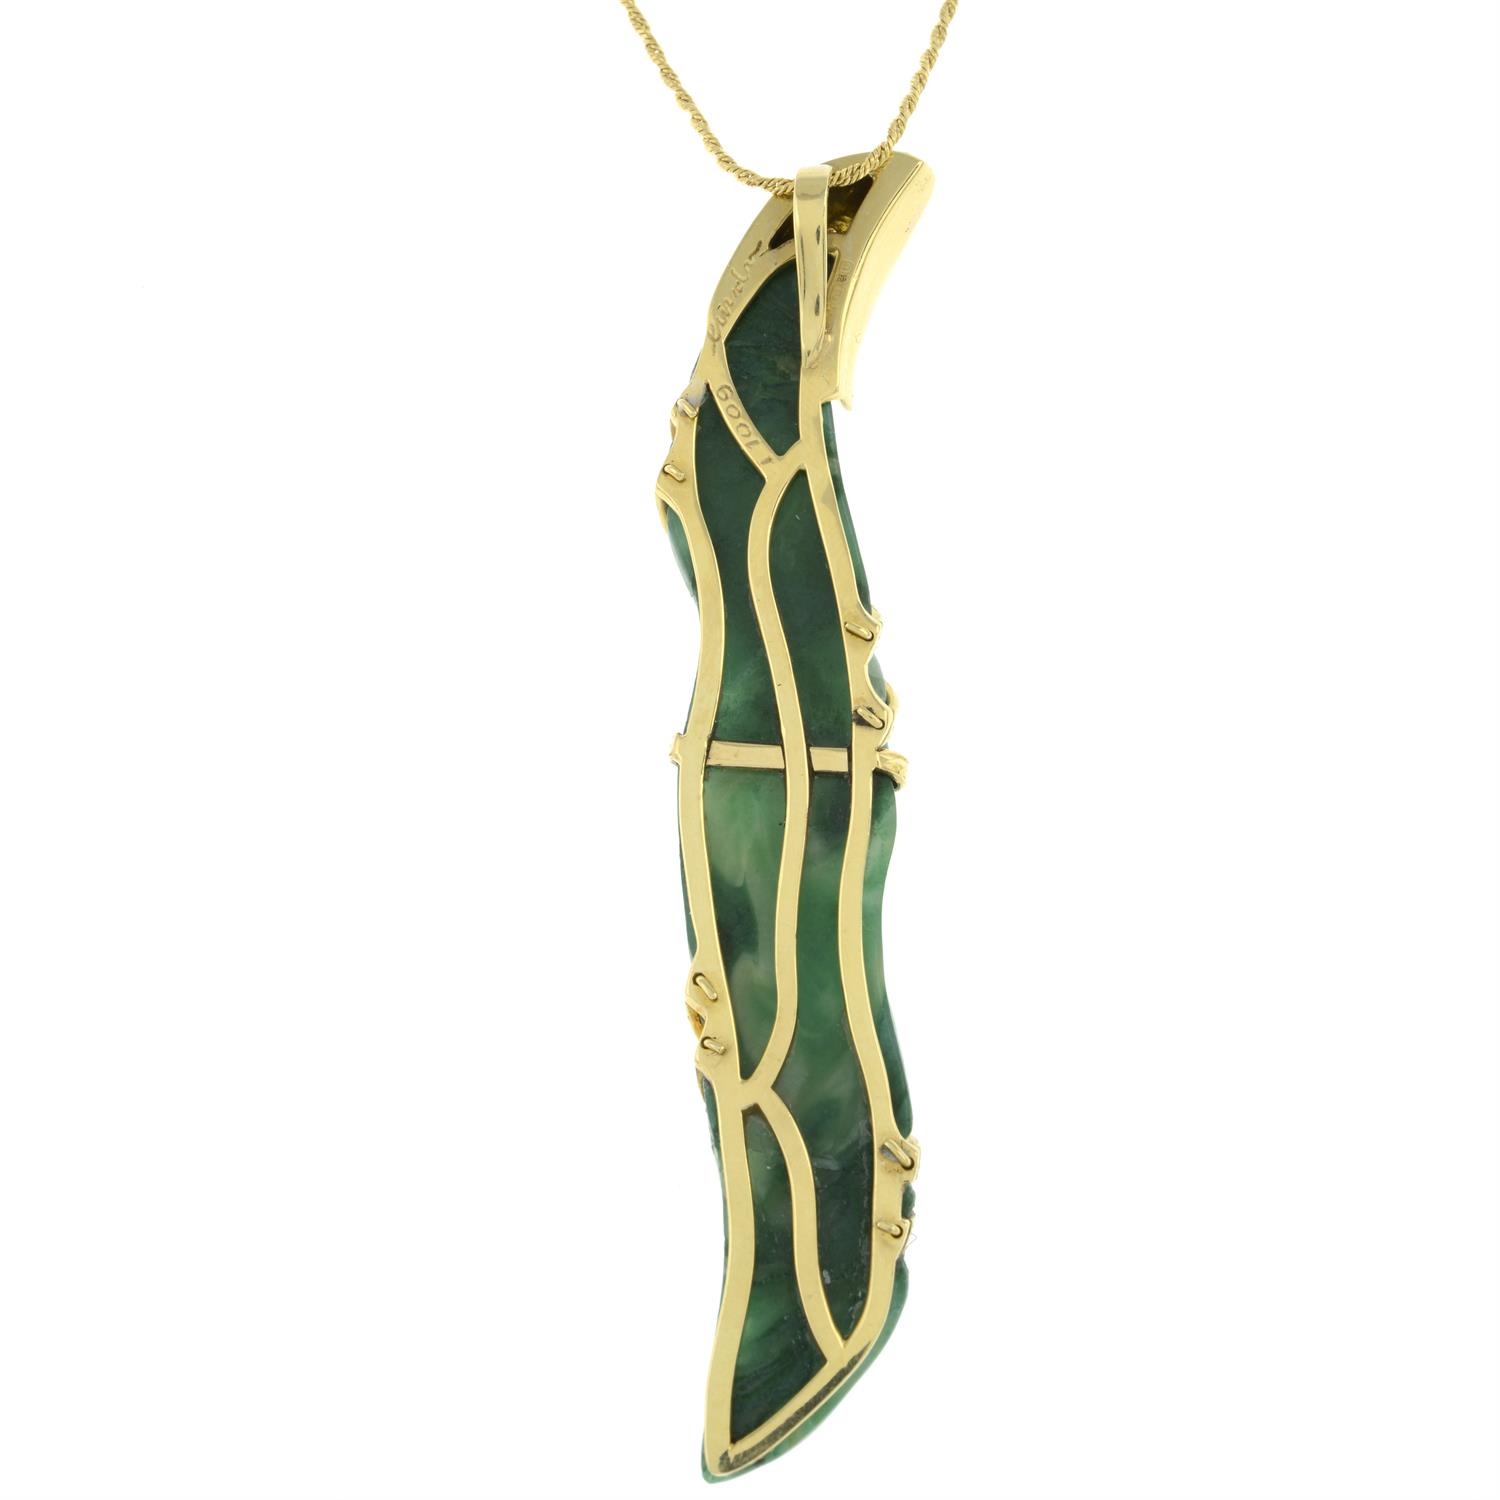 18ct gold diamond and green stone pendant, with chain - Image 3 of 5